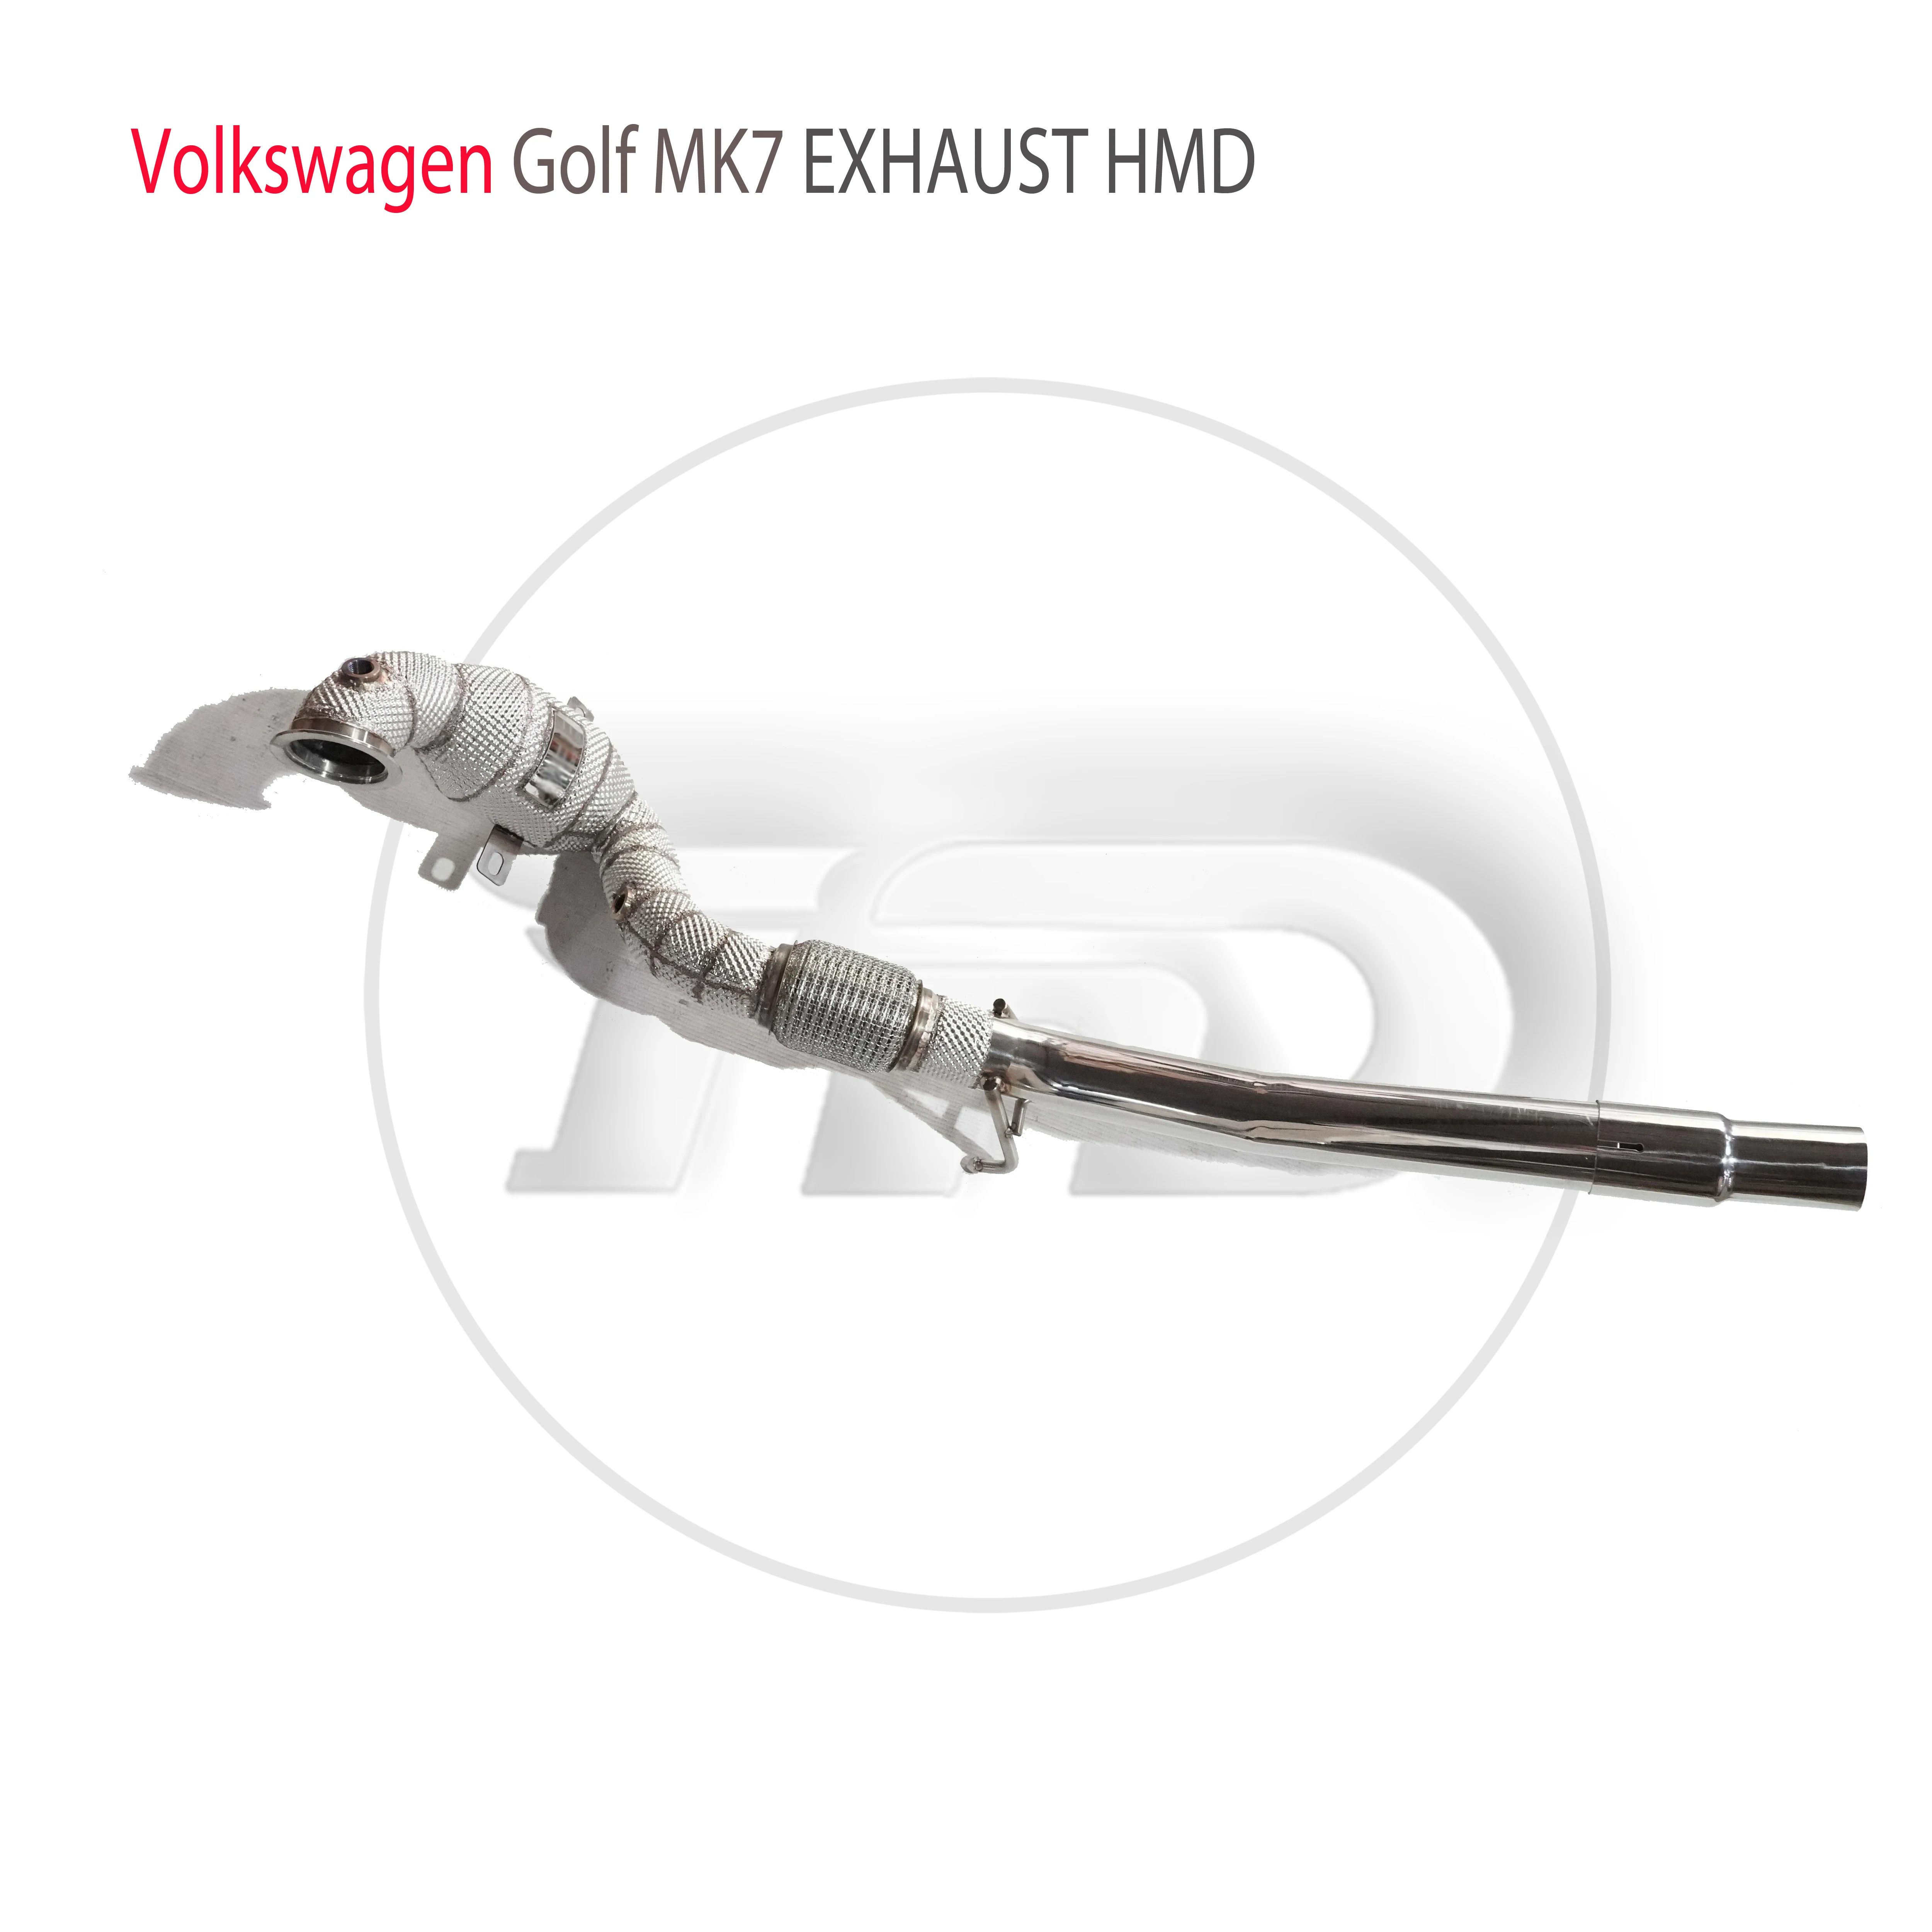 

HMD Car Accessories Exhaust High Flow Performance Downpipe for Volkswagen Golf MK7 1.4T With Catalytic Converter